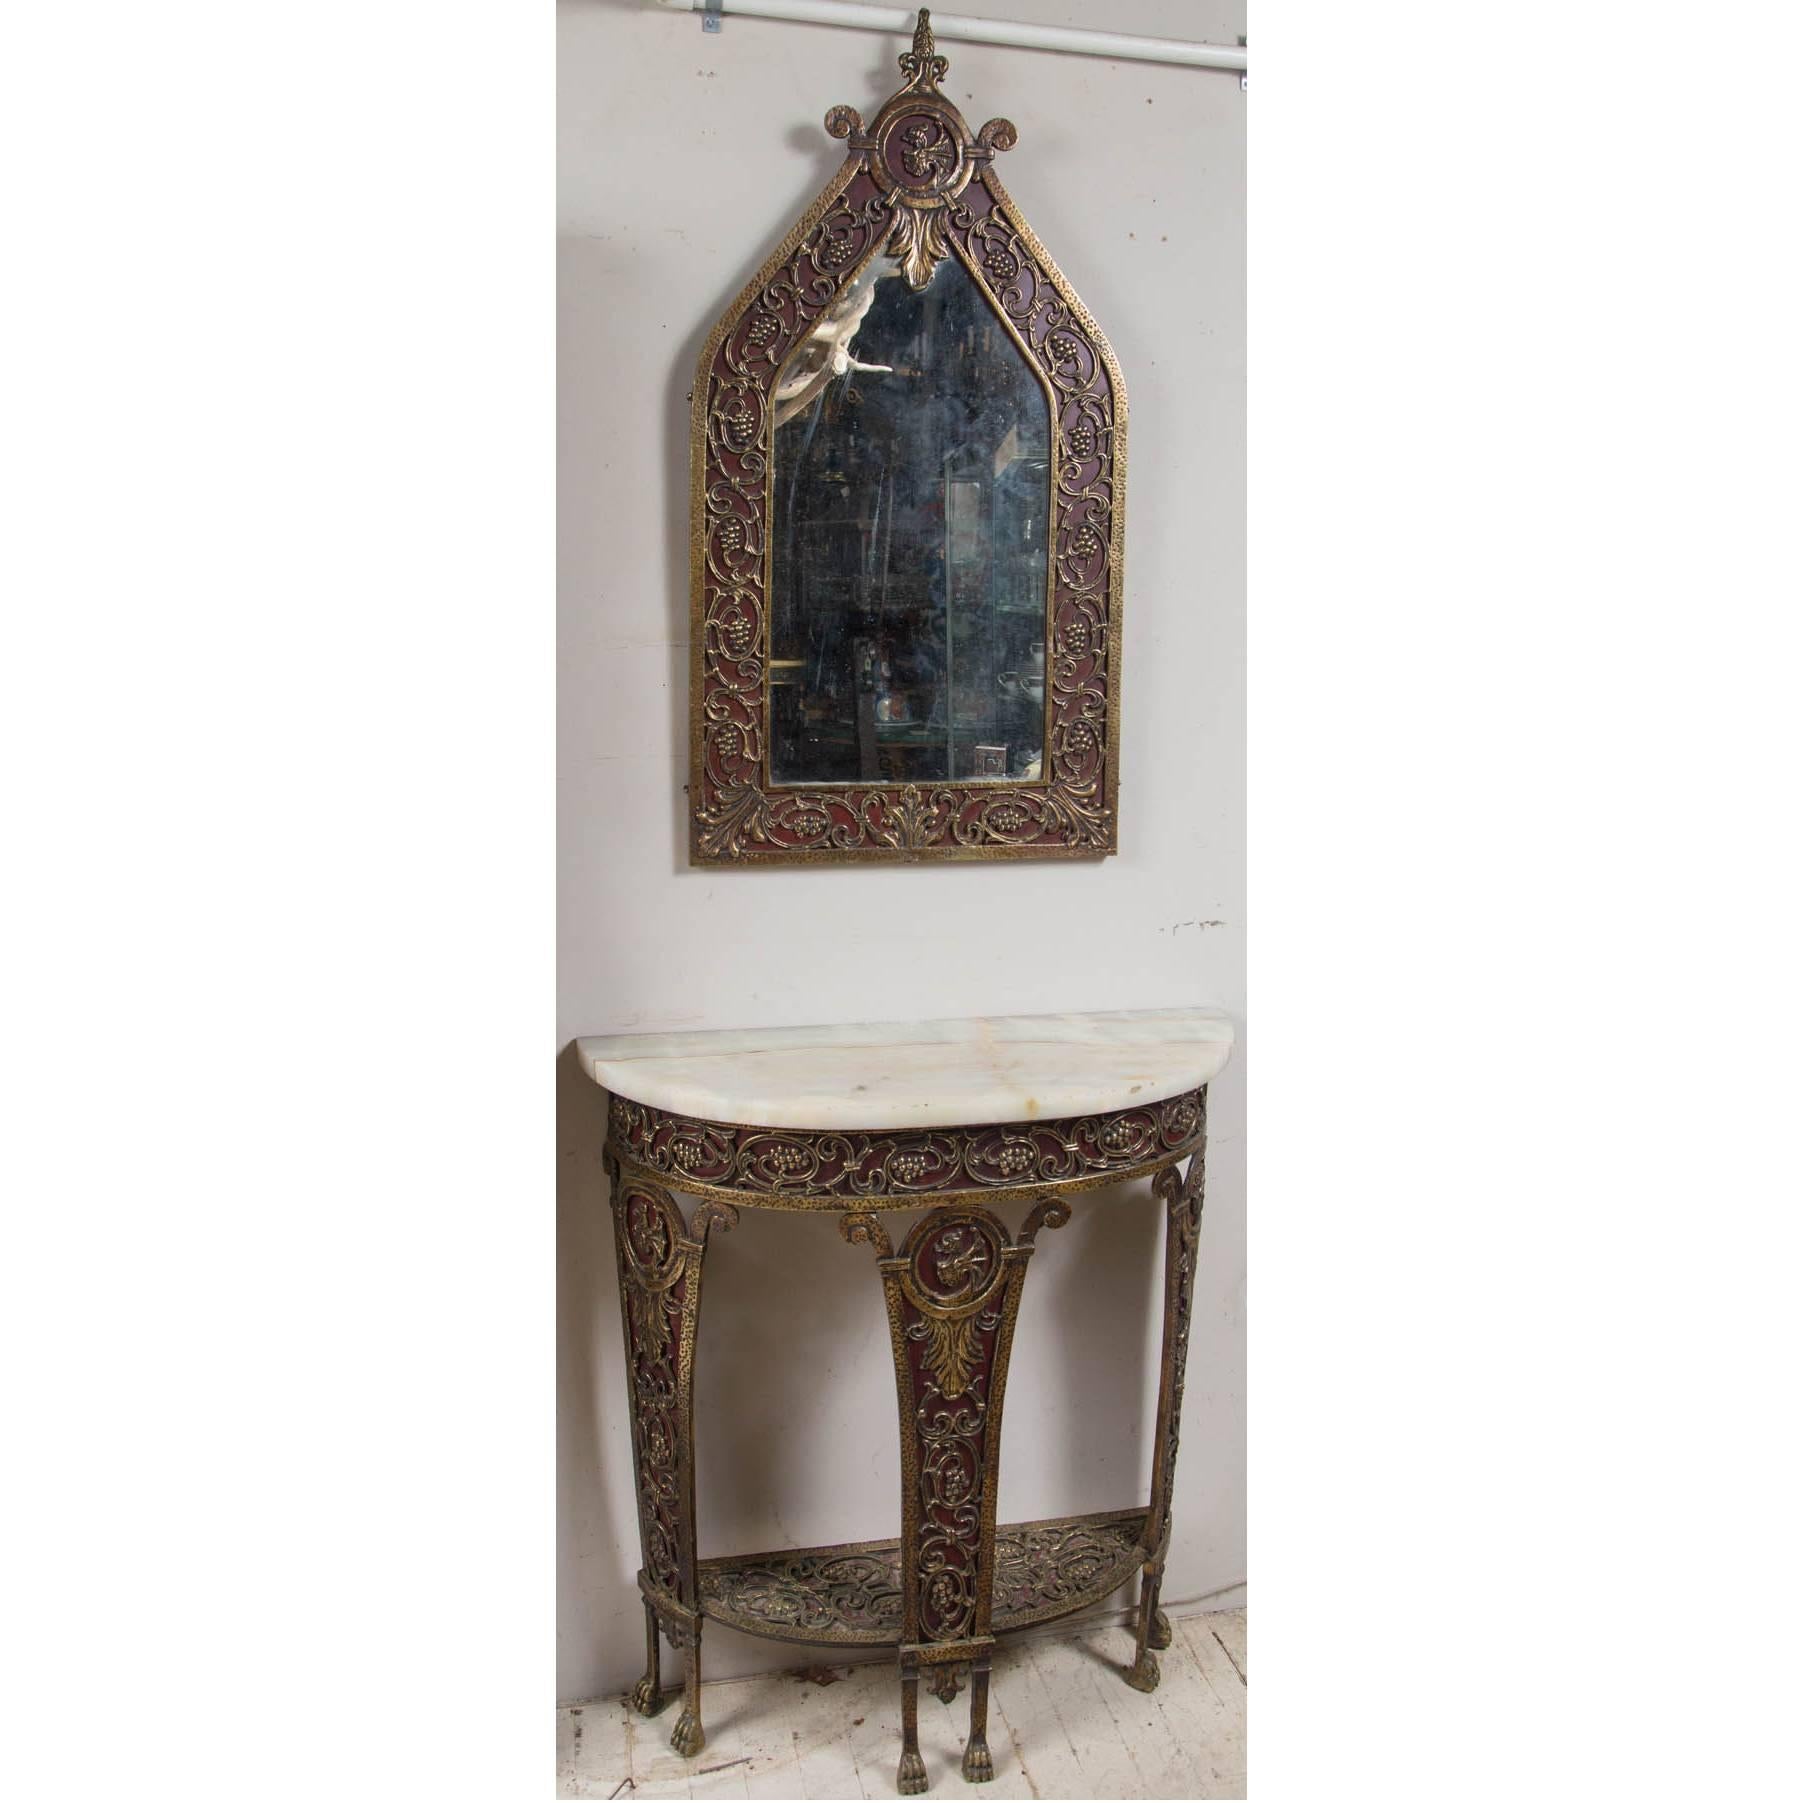 Made of brass and intricately designed with dragons, clusters, vines and leaves
Alabaster demilune top
Paw feet
The open work of the brass is backed by dark red painted metal.
The mirror measures 40.75 x 21.5
Measurements below are for the